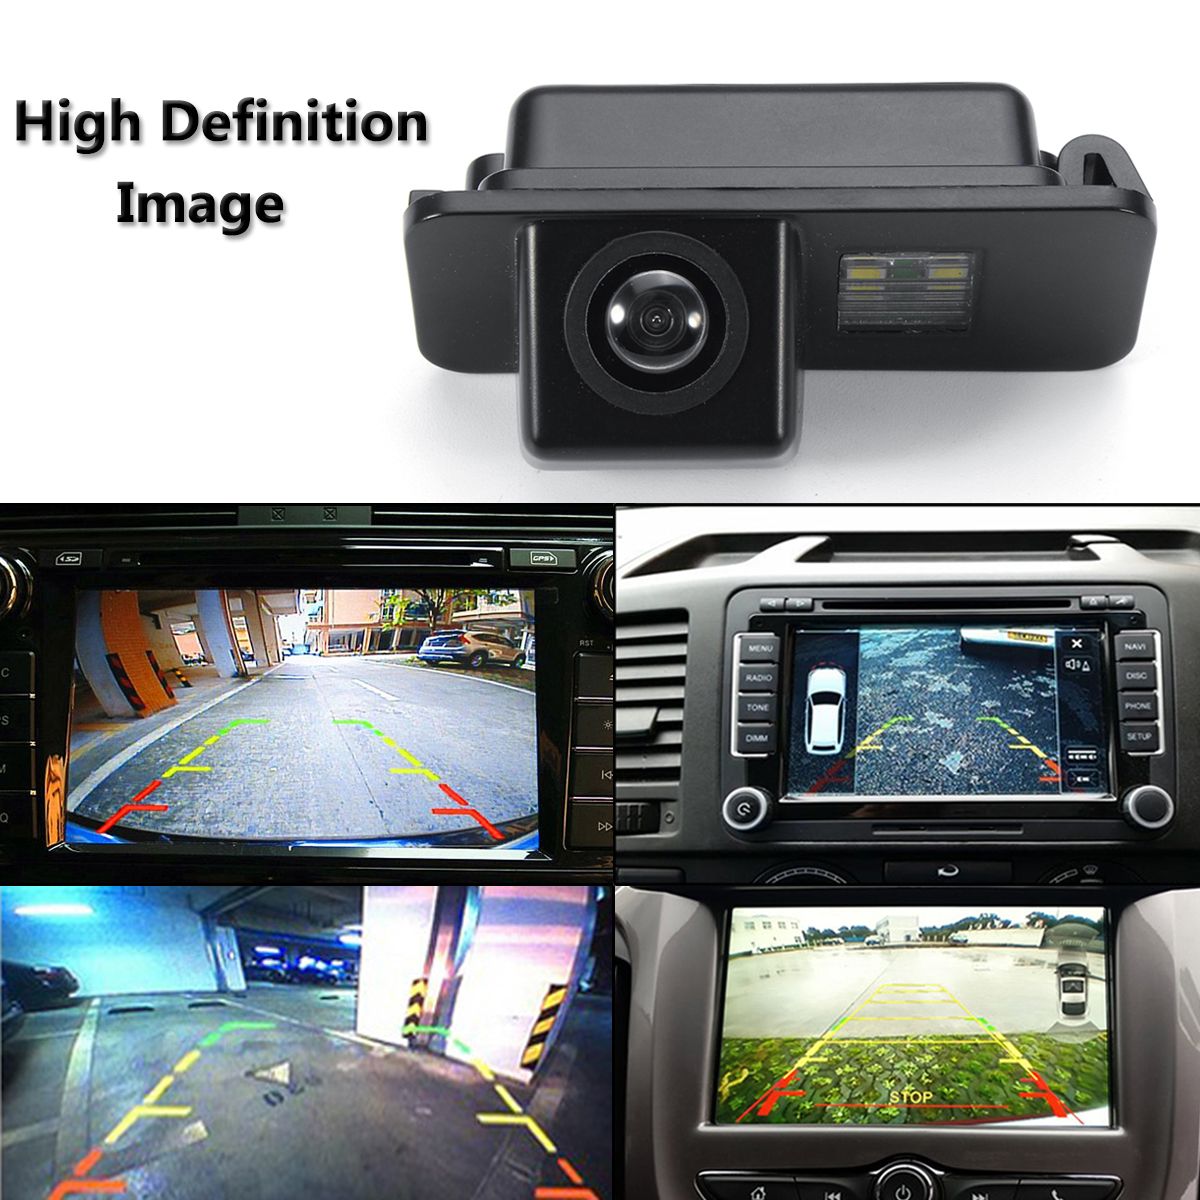 Wireless-Car-CCD-Reverse-Rear-View-Camera-for-Ford-Mondeo-Fiesta-Focus-S-Max-Kug-1244446